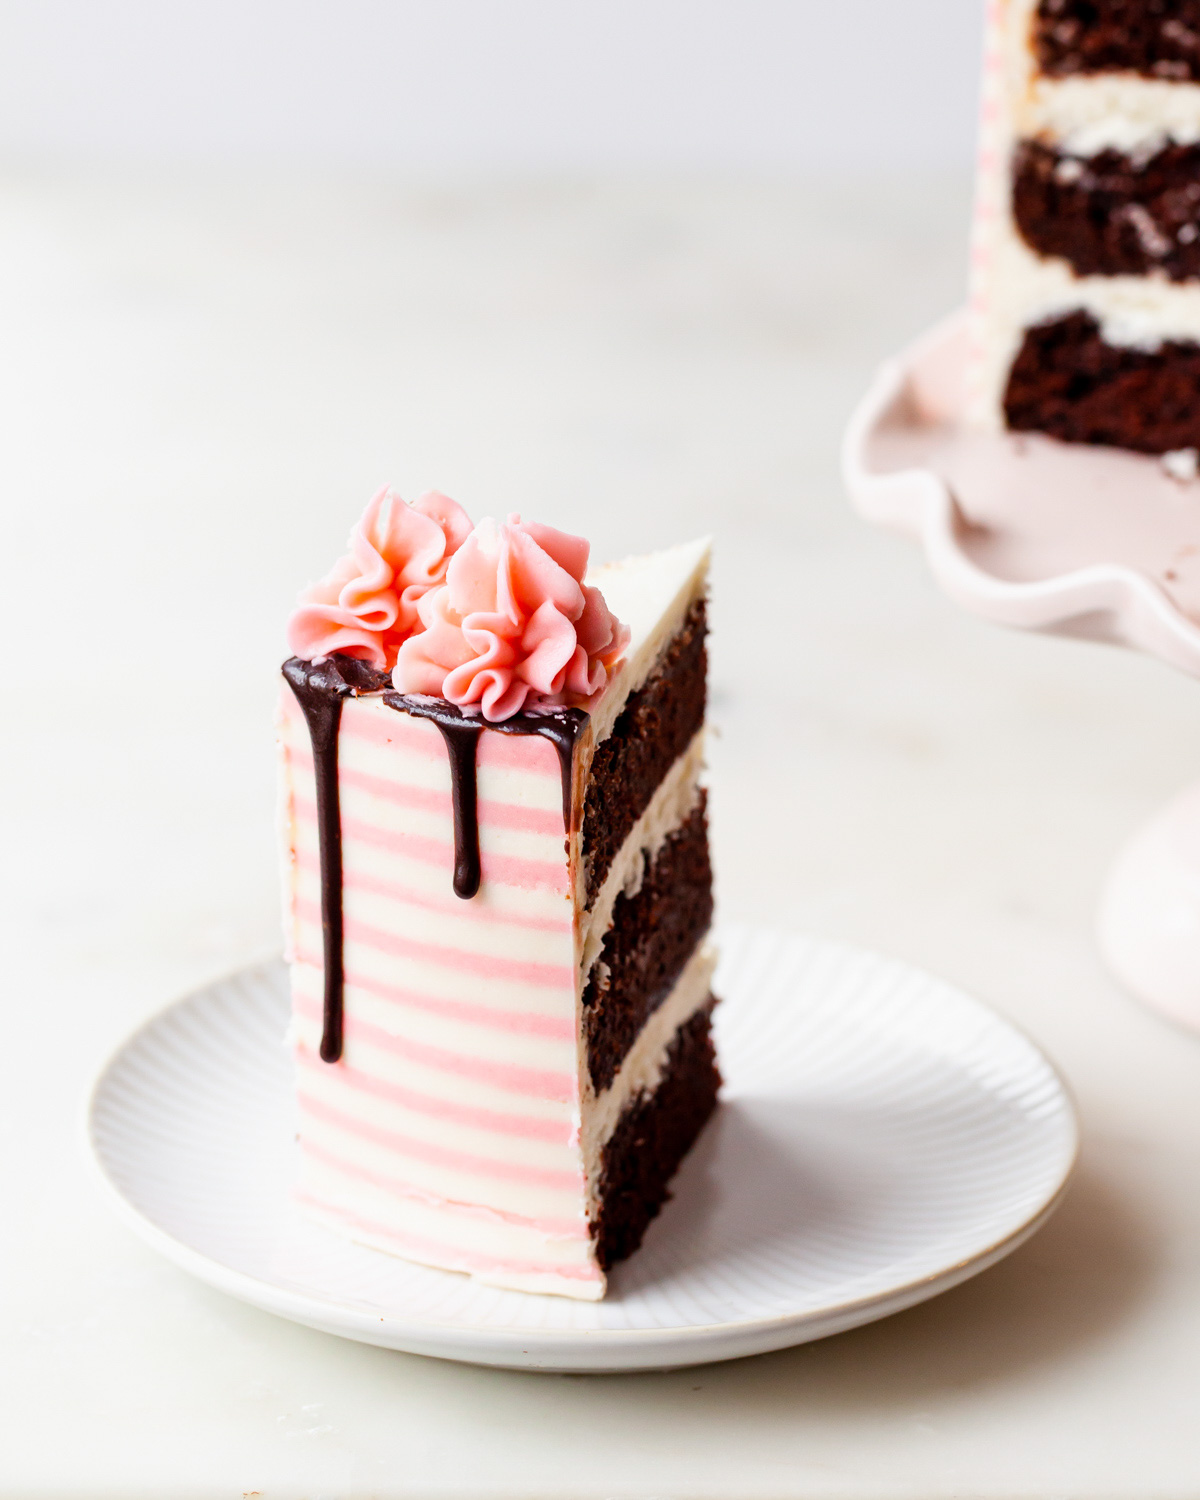 A close up of a chocolate peppermint cake